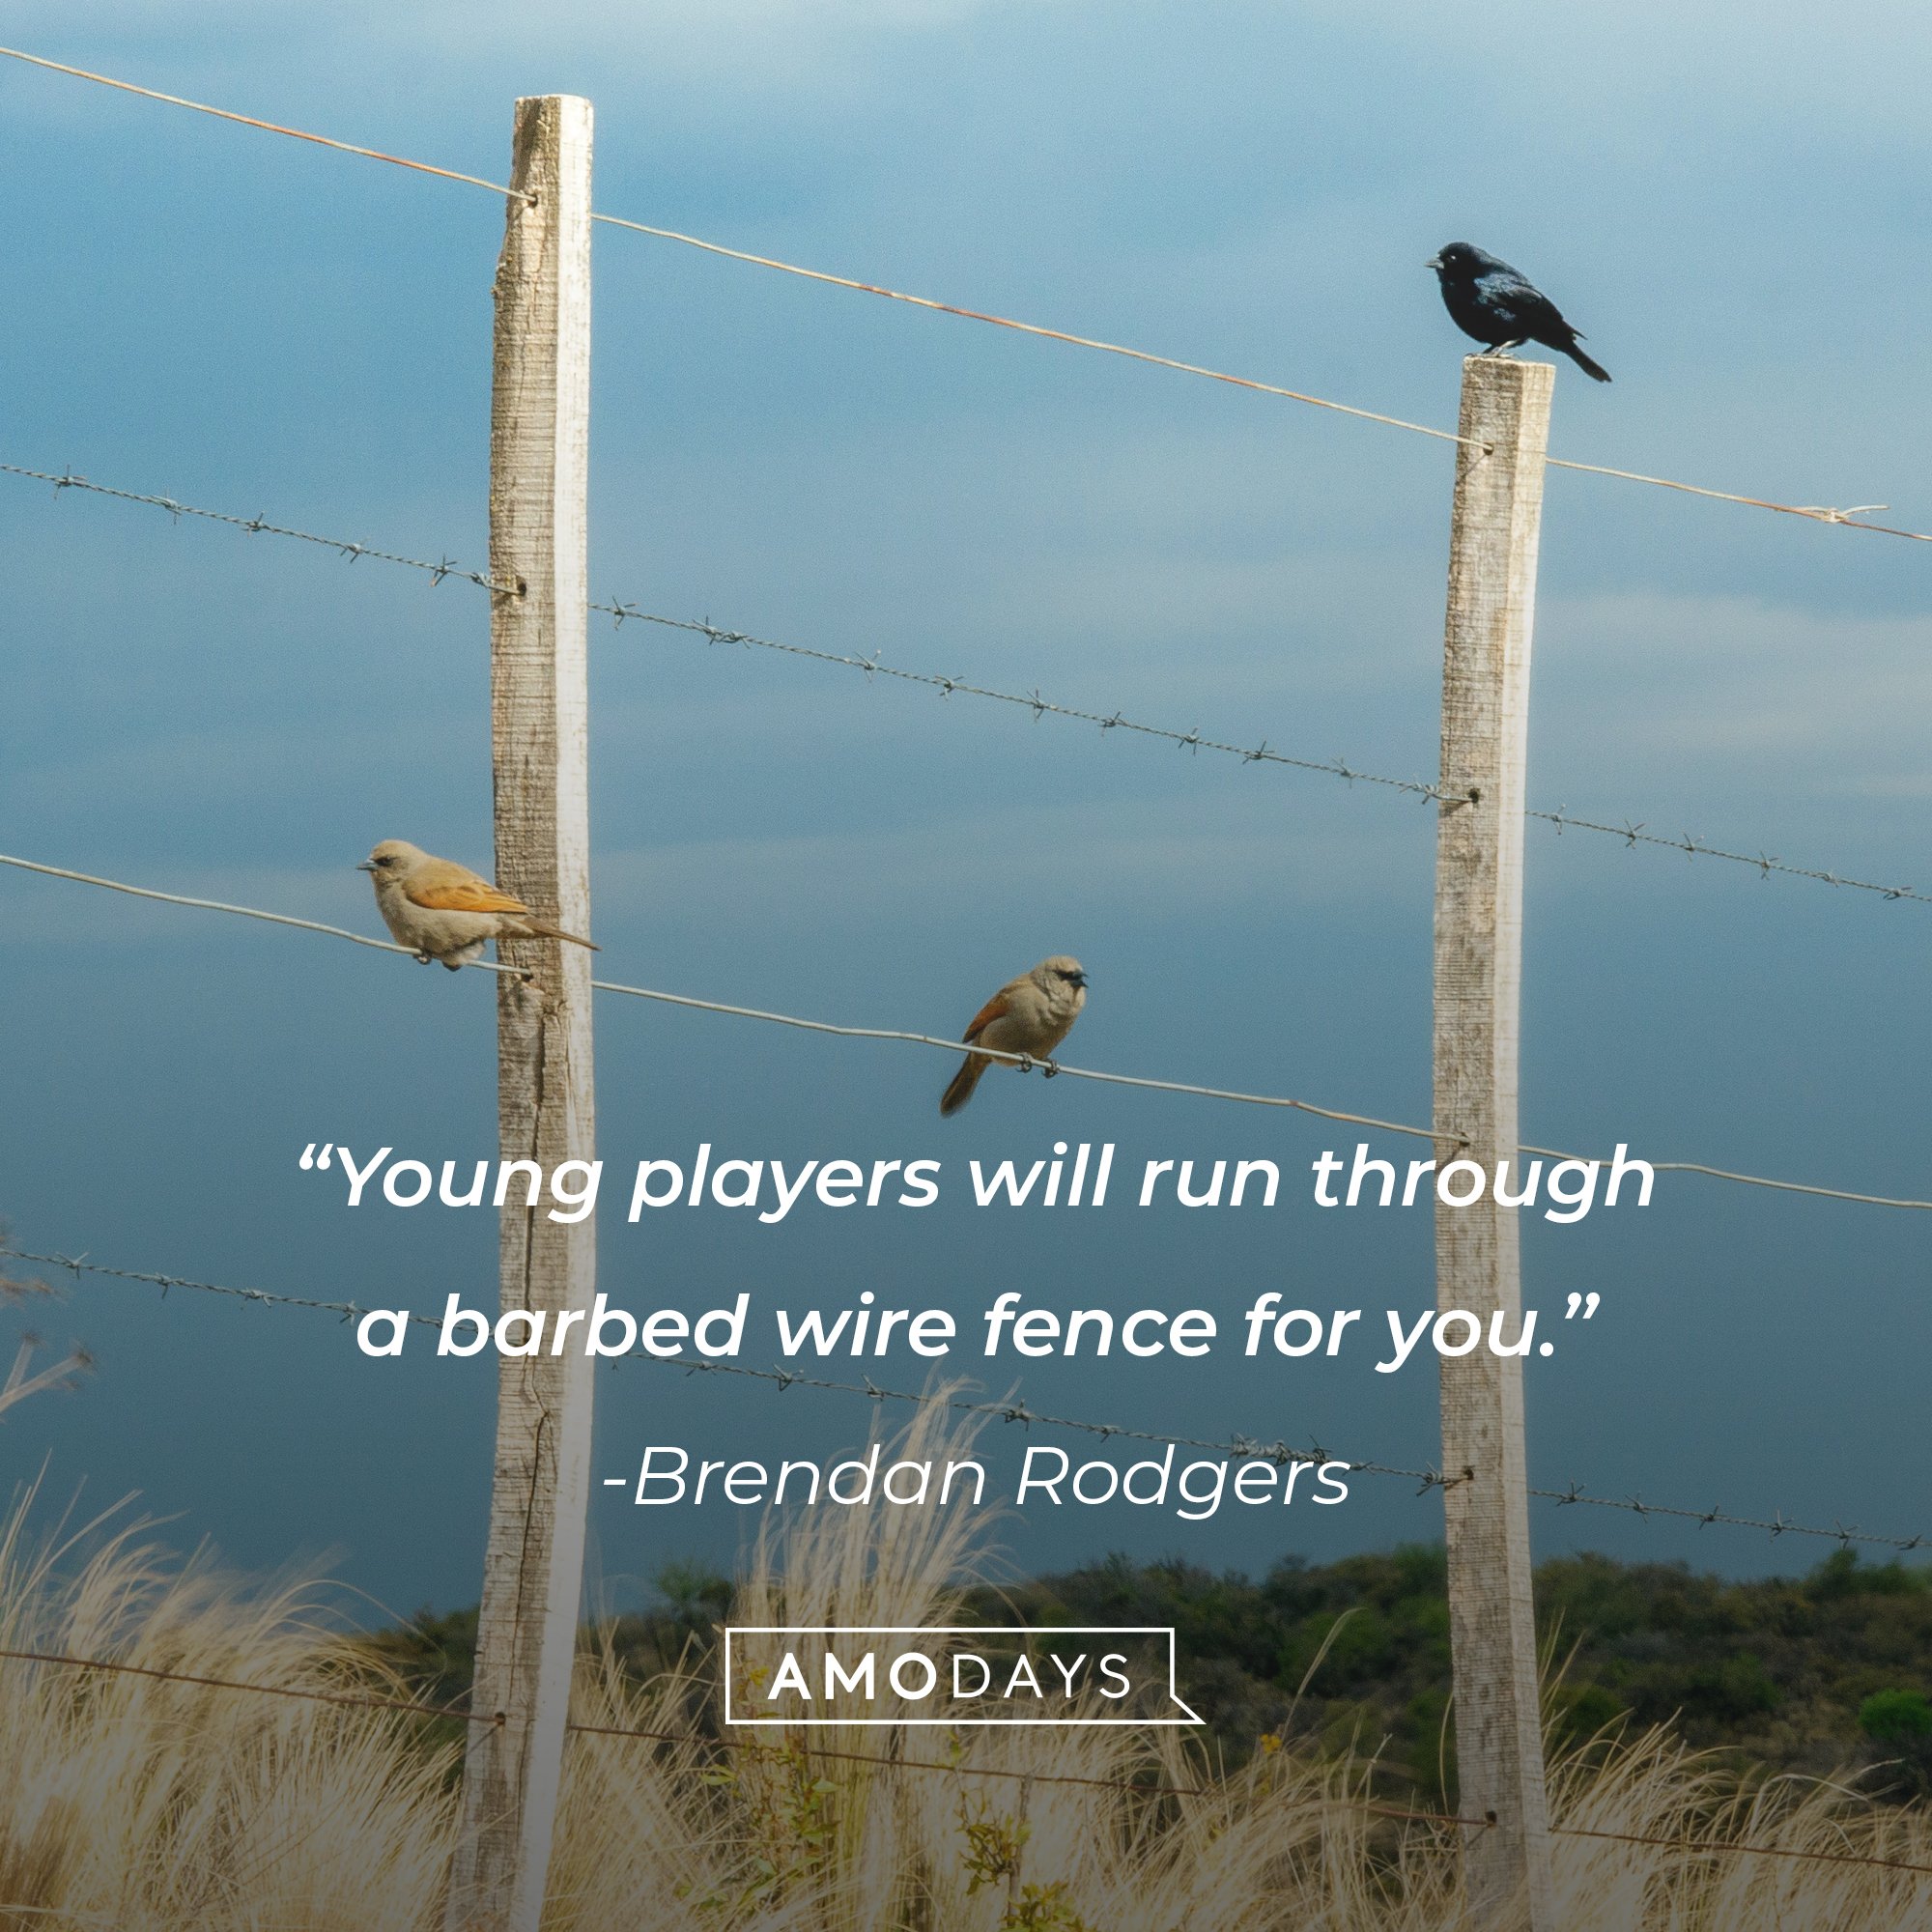 Brendan Rodgers's quote: “Young players will run through a barbed wire fence for you.” | Image: AmoDays